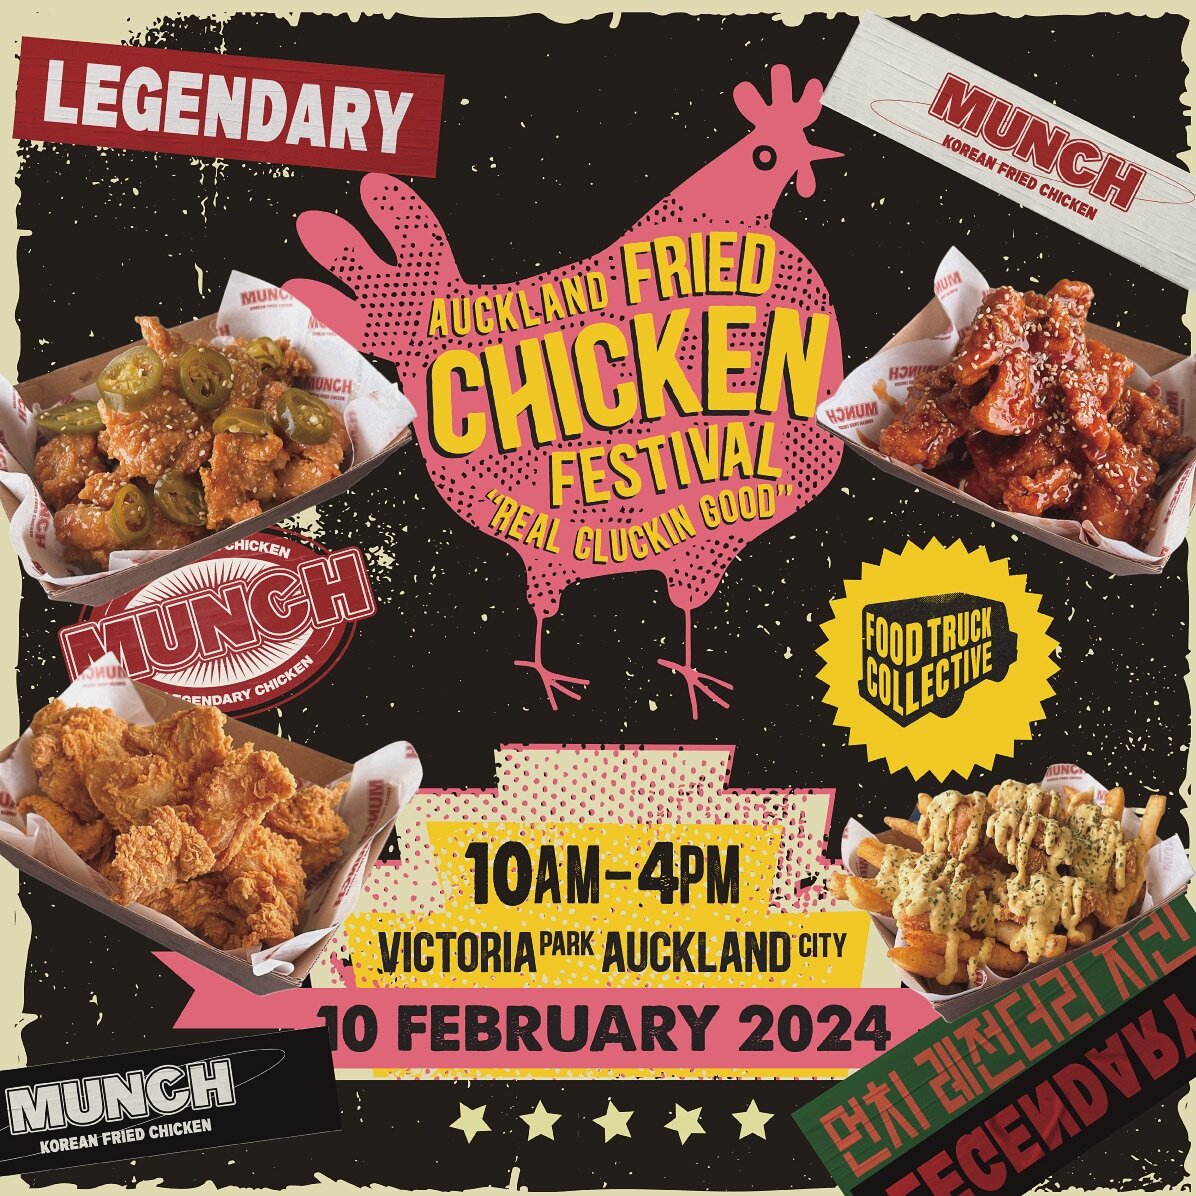 📌 The Fried Chicken Festival is back in 2024 at Victoria Park on 10th February and we are attending!! We&rsquo;re super excited to be heading along and bringing you the best fried chicken dishes to feast on🍗🤟

Tickets are now live on eventfinda, h